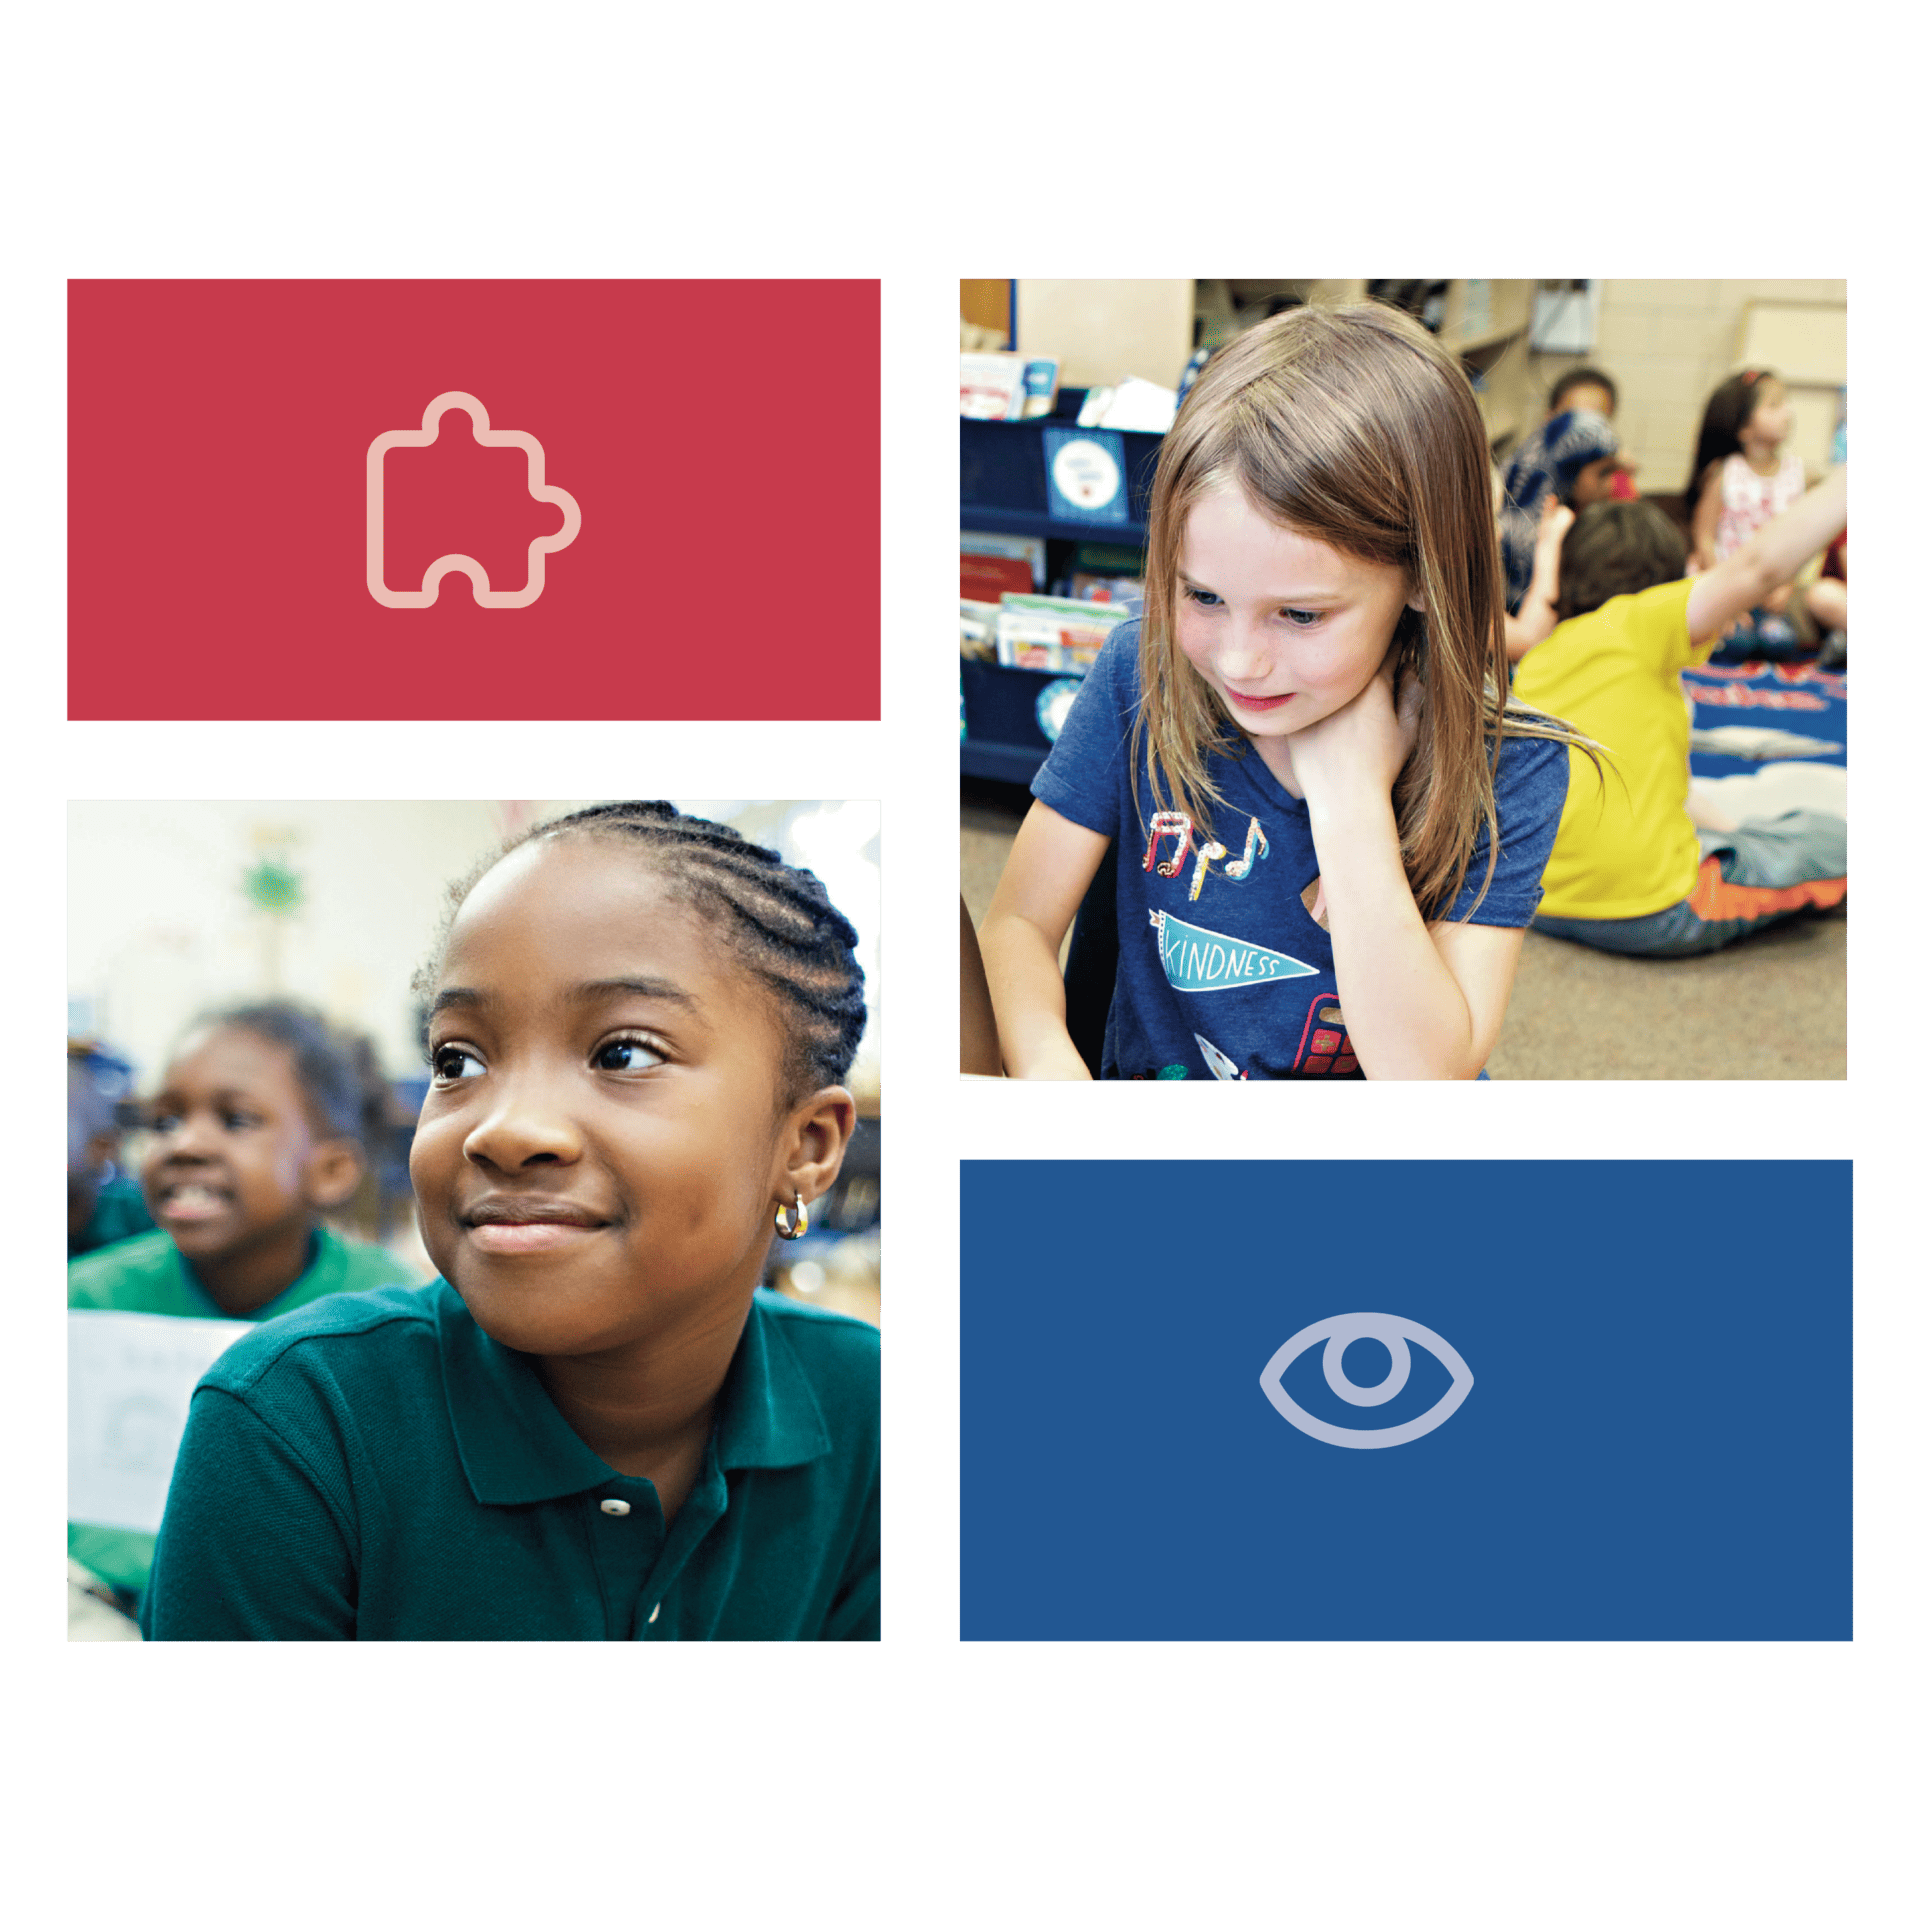 A collage of four images: one with a puzzle piece icon, one showing a girl reading in a library, another of a smiling girl in a classroom, and an eye icon.